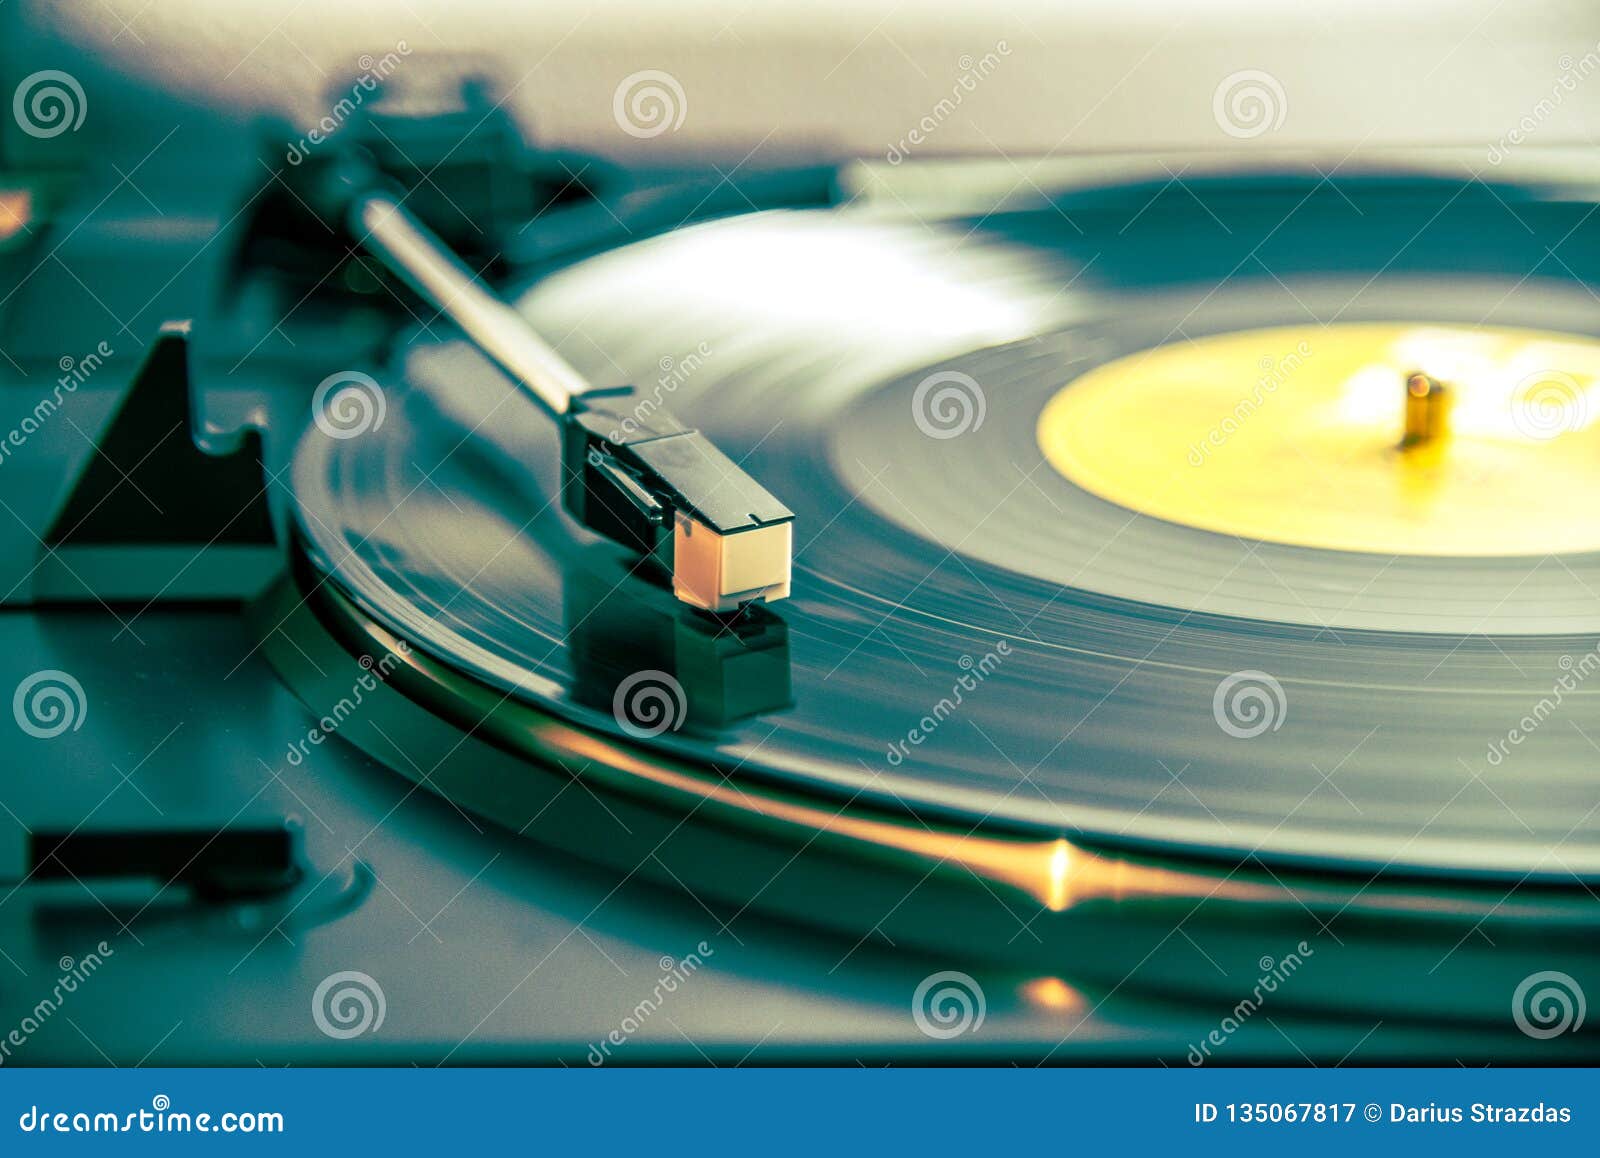 turntable and vinyl